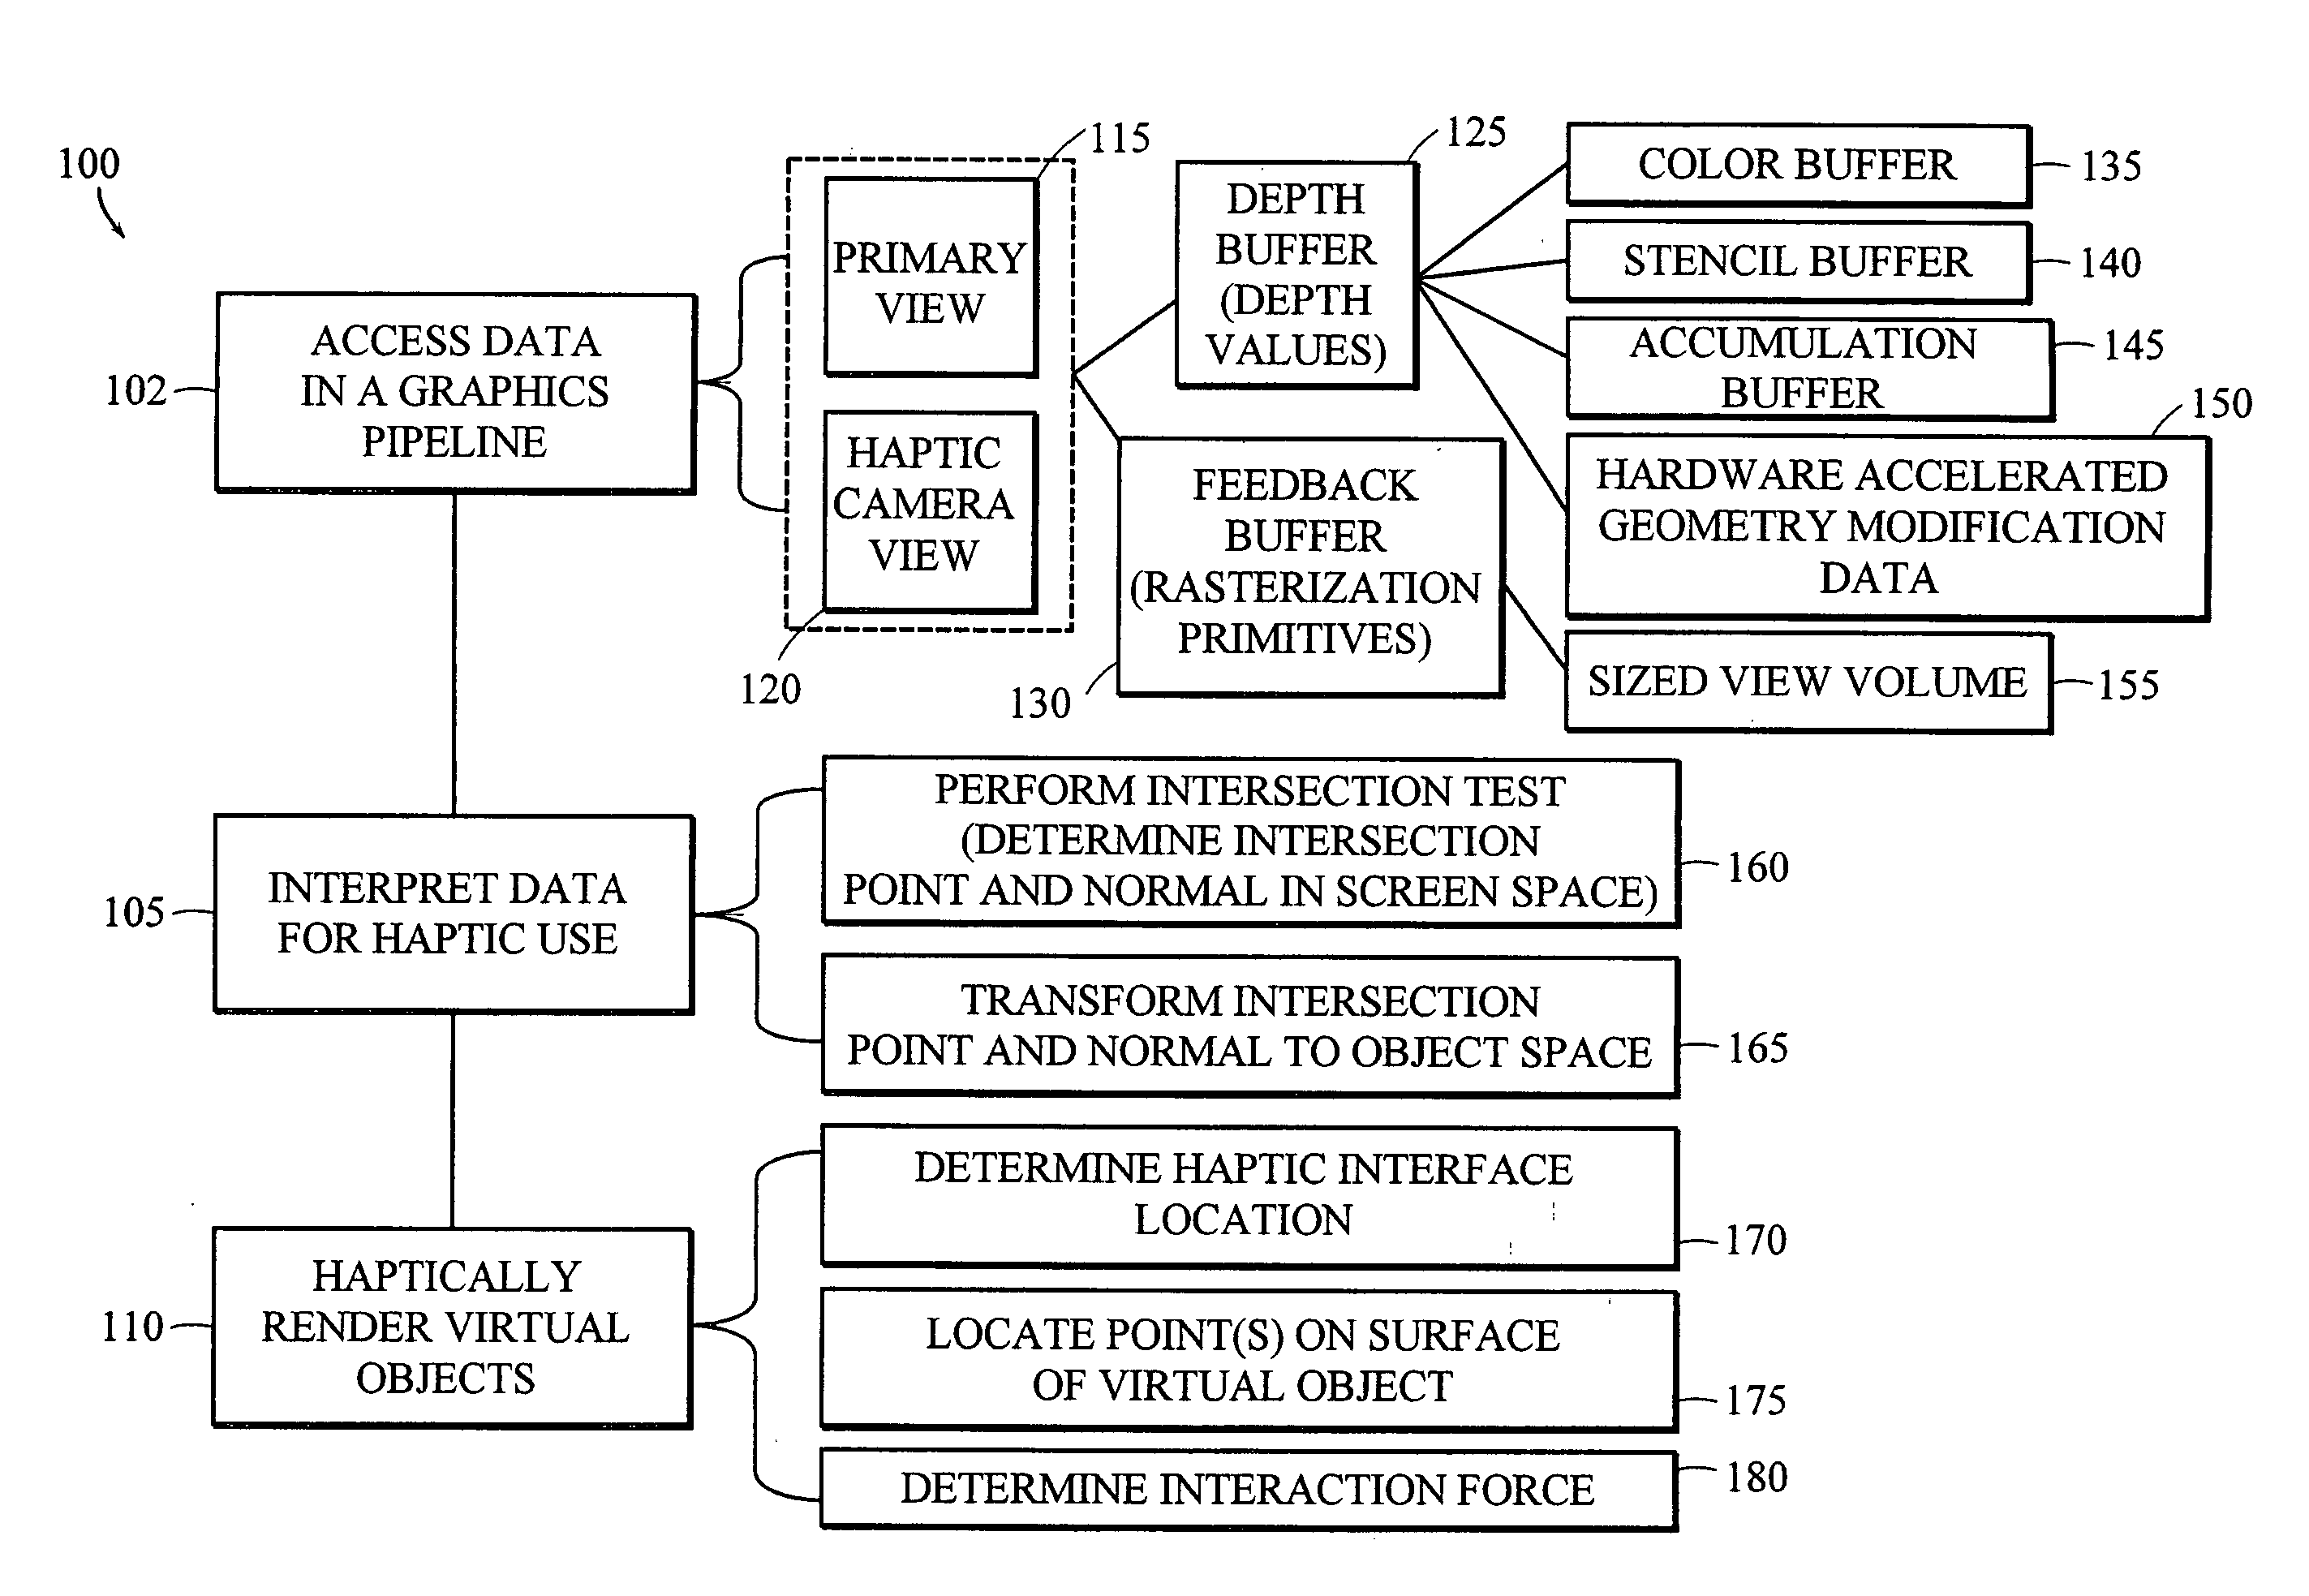 Apparatus and methods for haptic rendering using data in a graphics pipeline